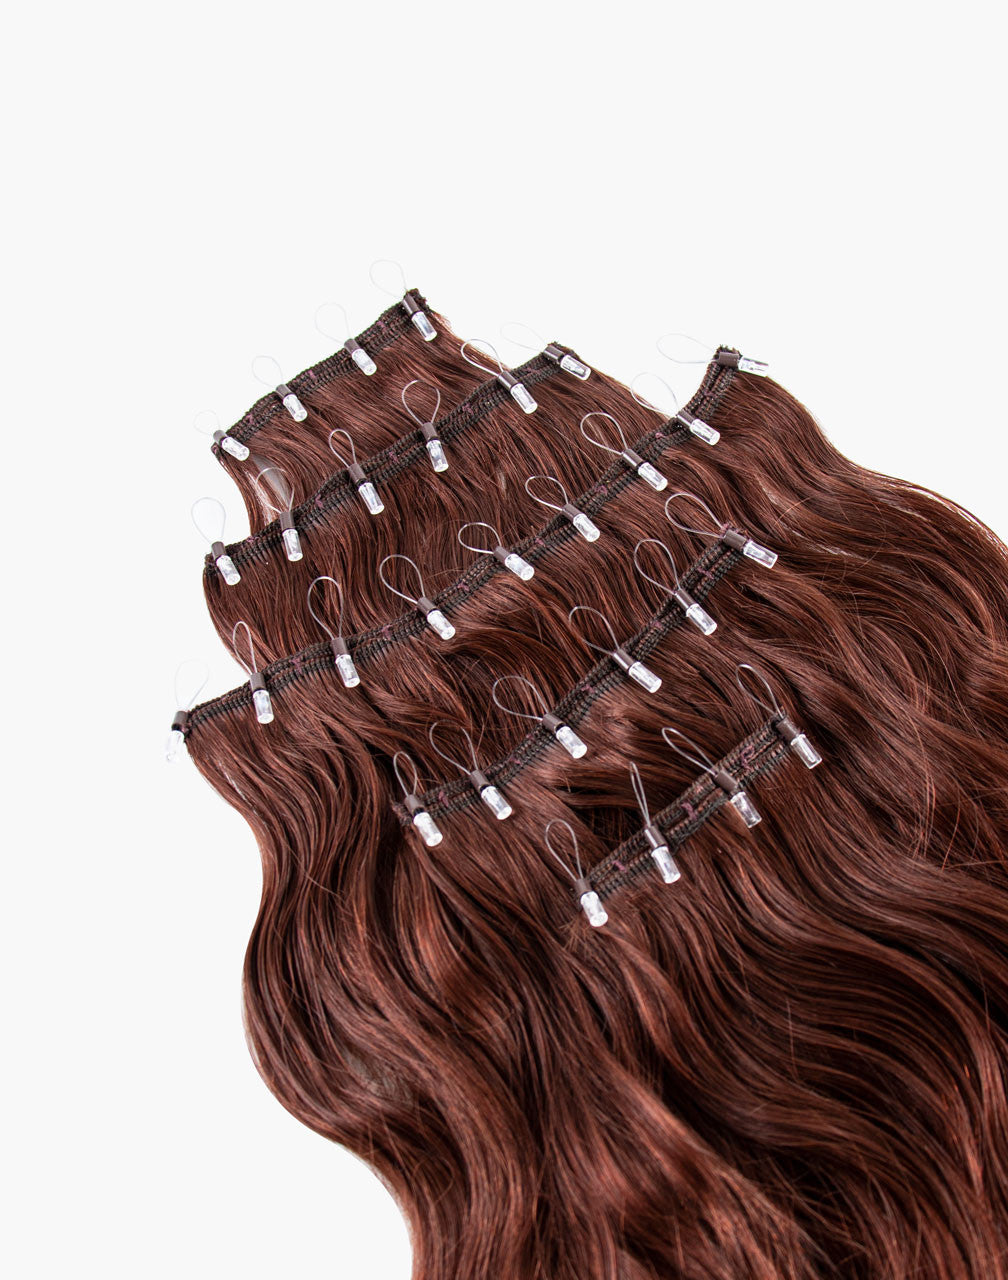 Weft Extension Toolkit - Line One Hair